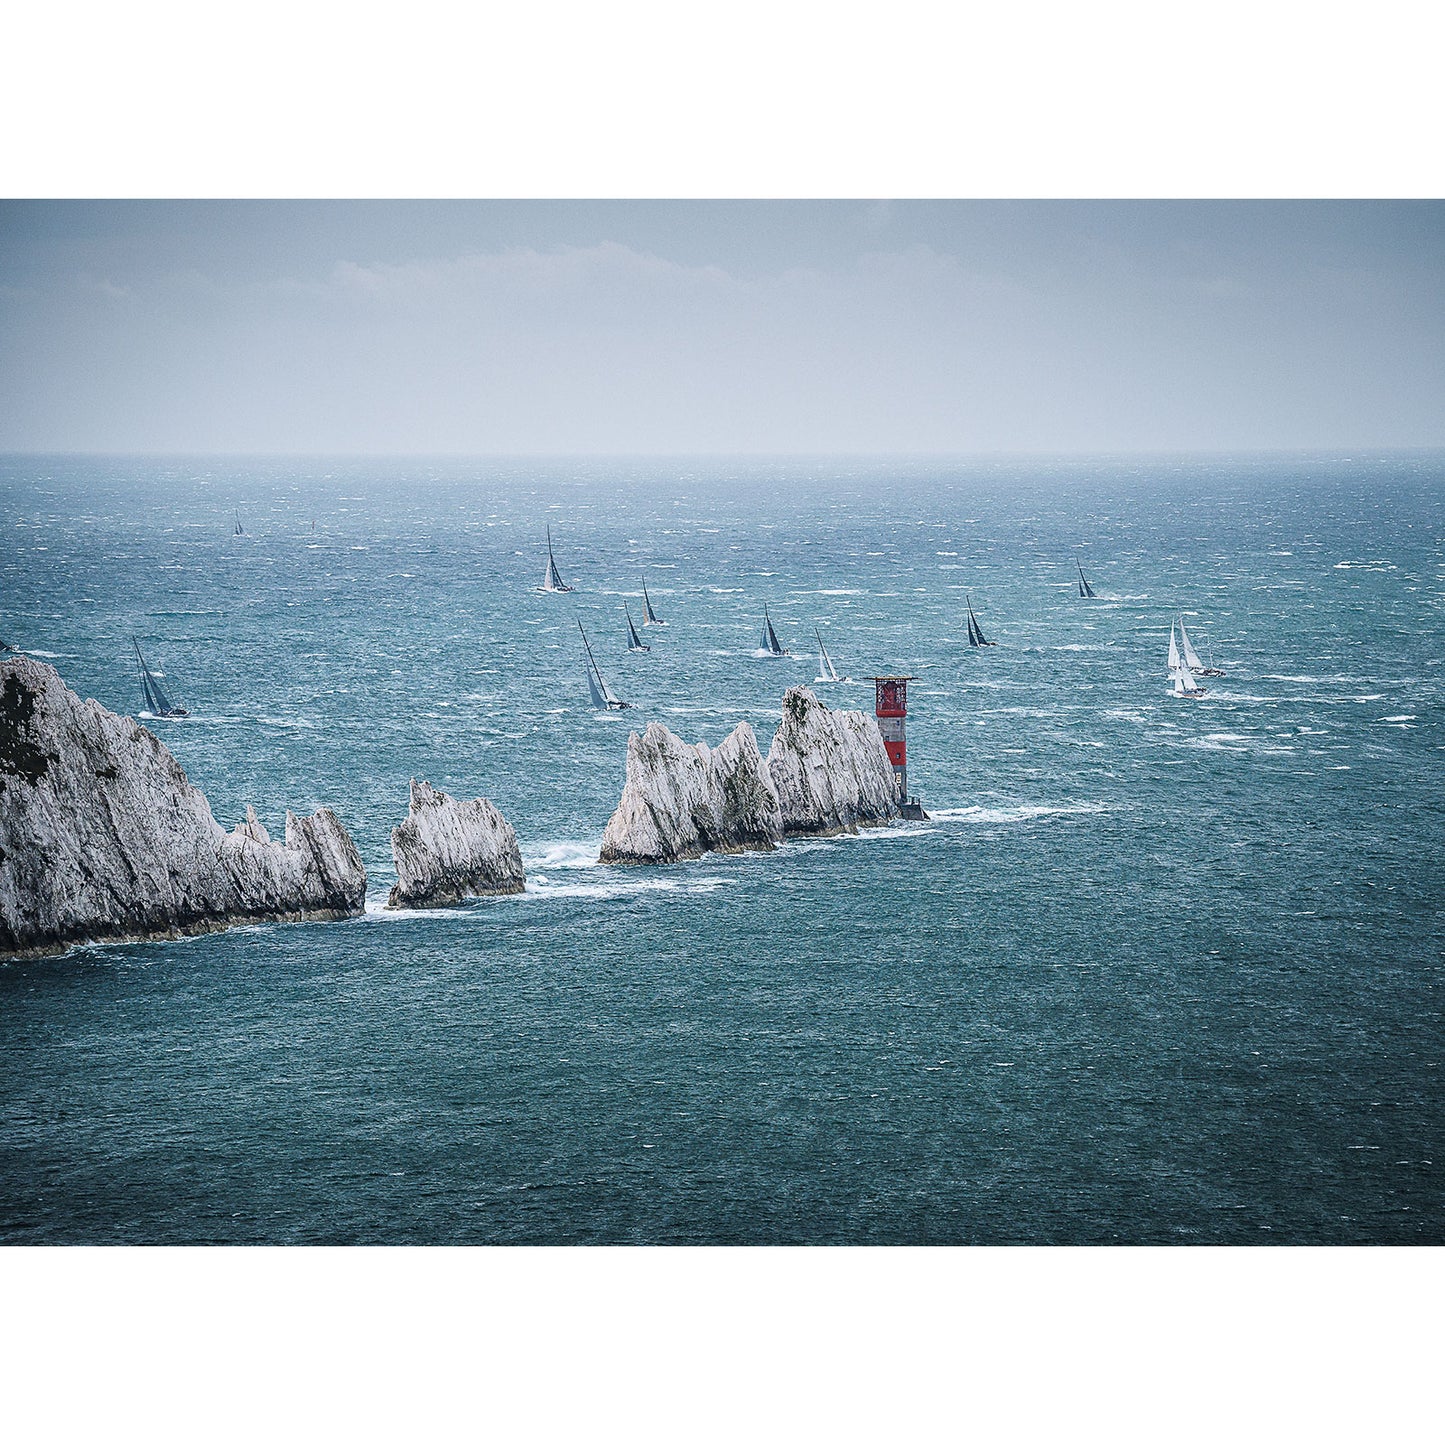 Fastnet Race at The Needles